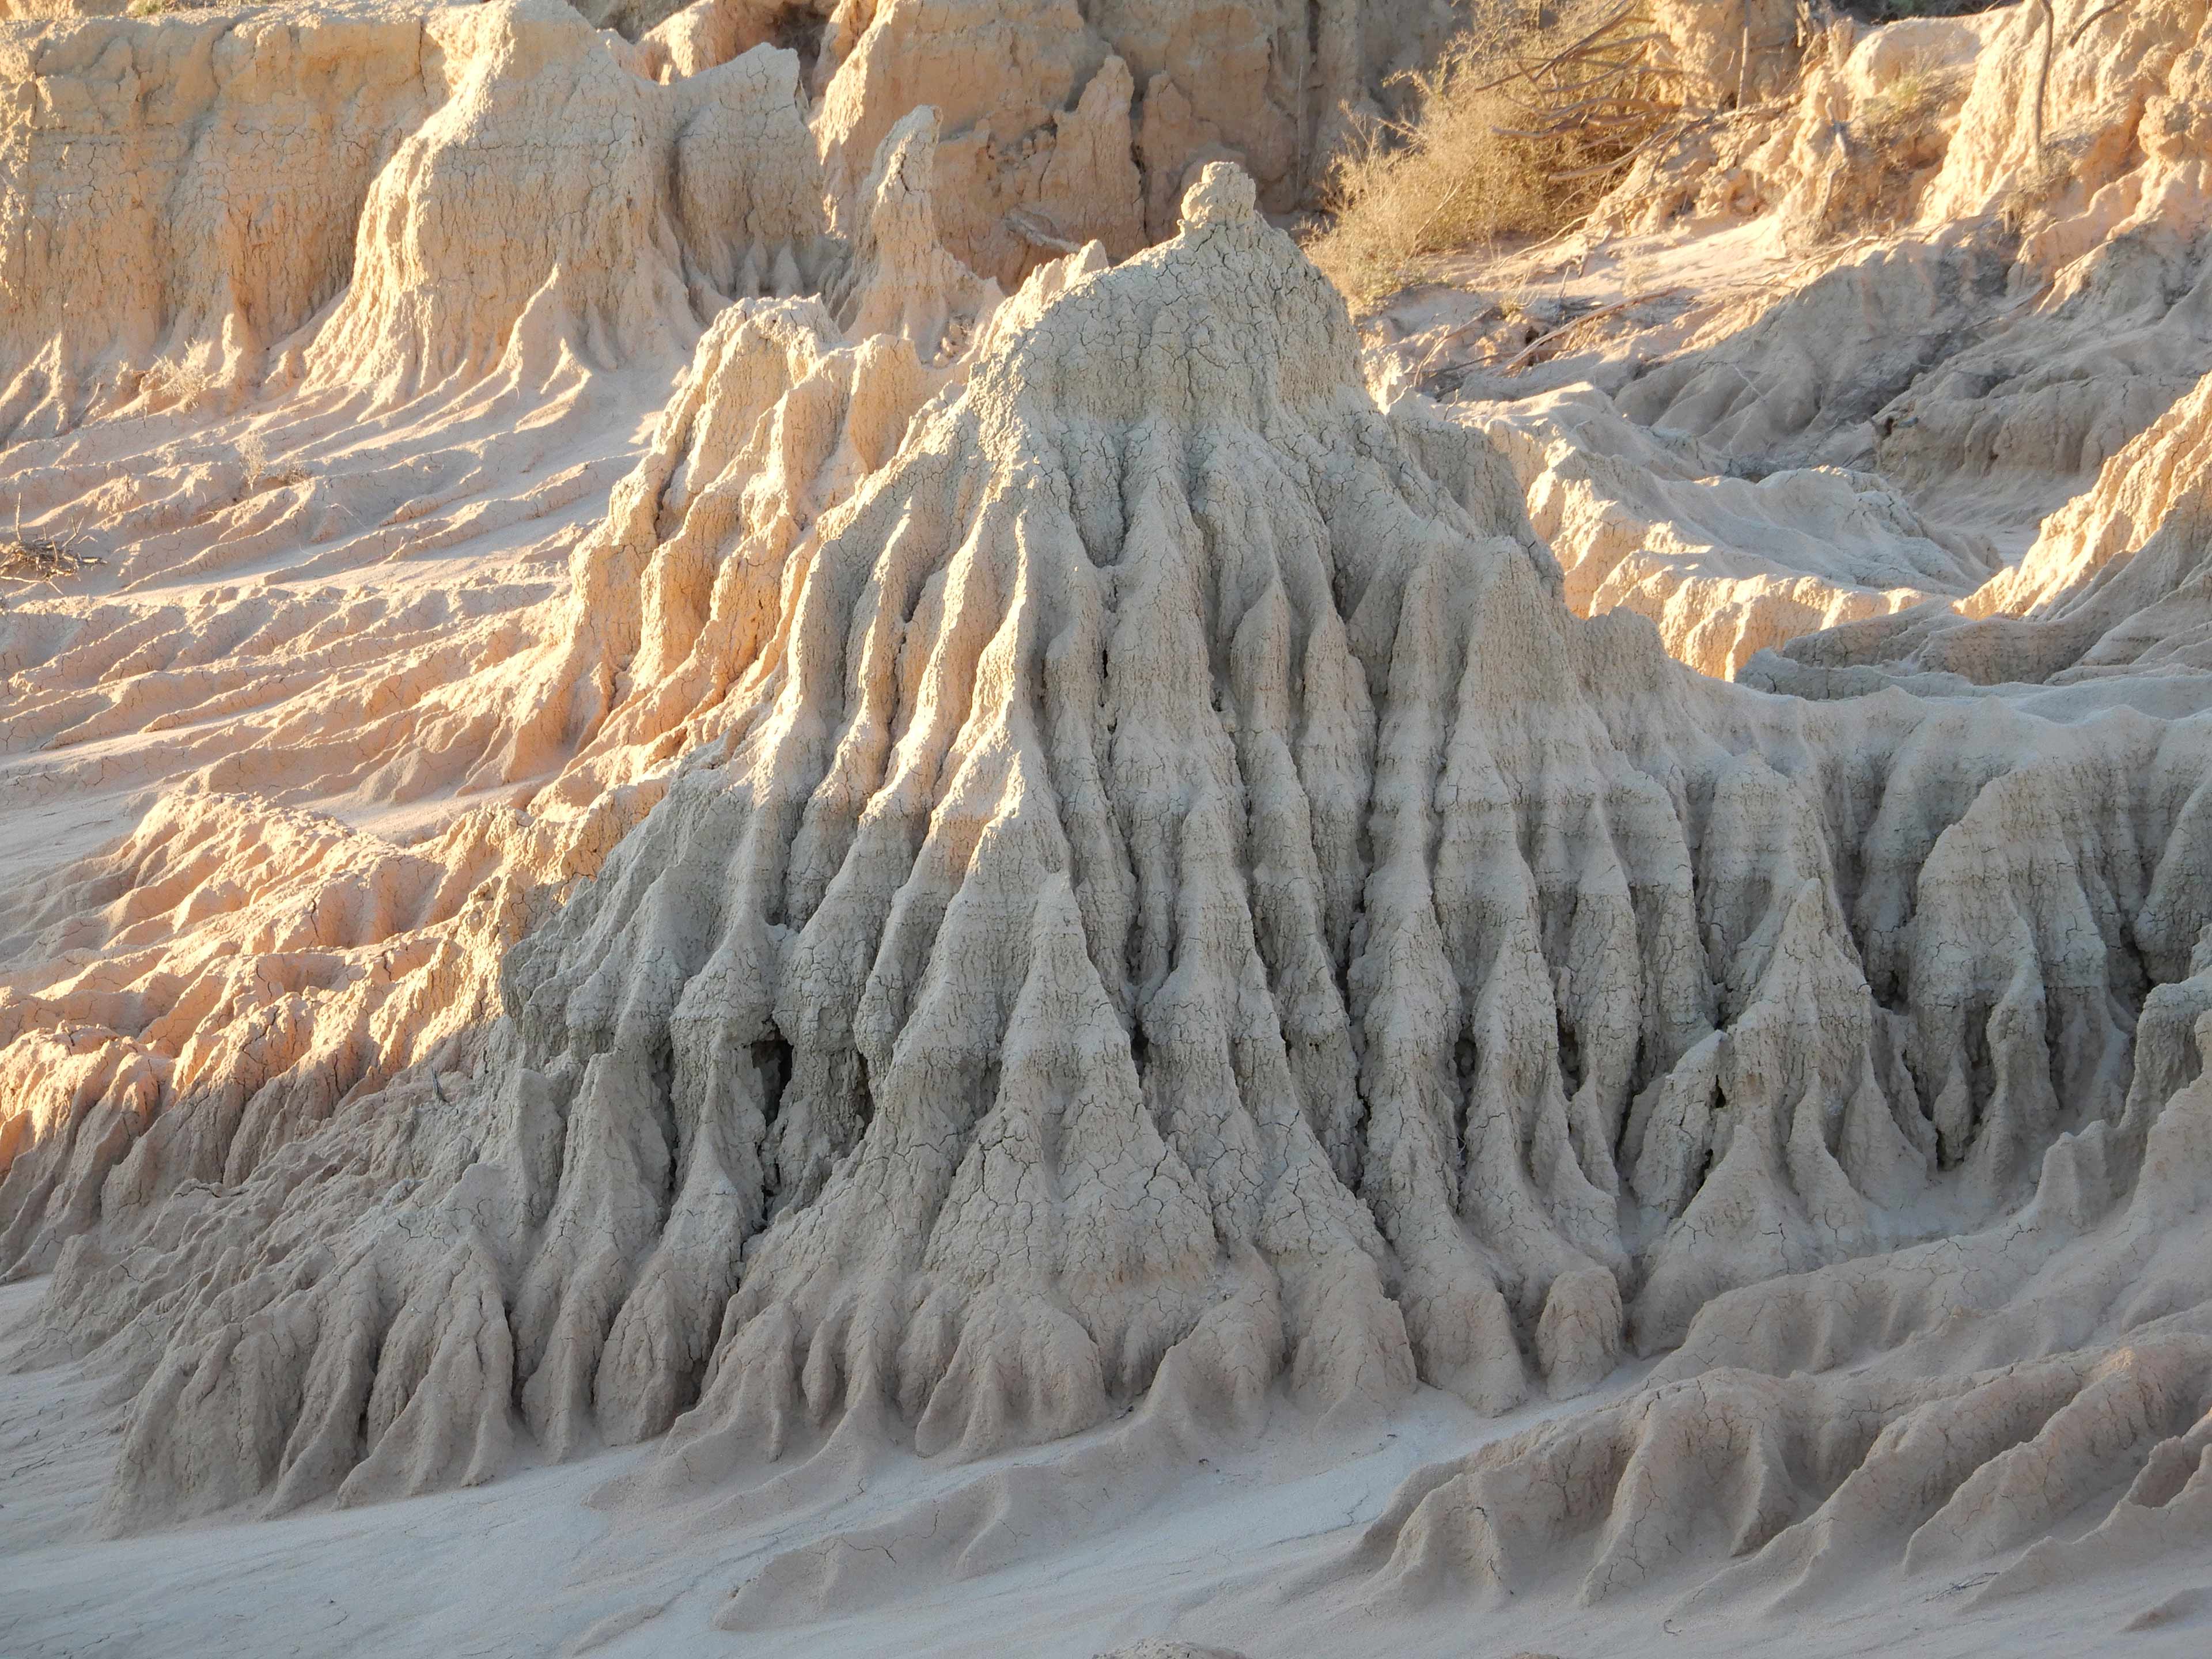 A lunette at Lake Mungo showing ancient soil layers, 2020